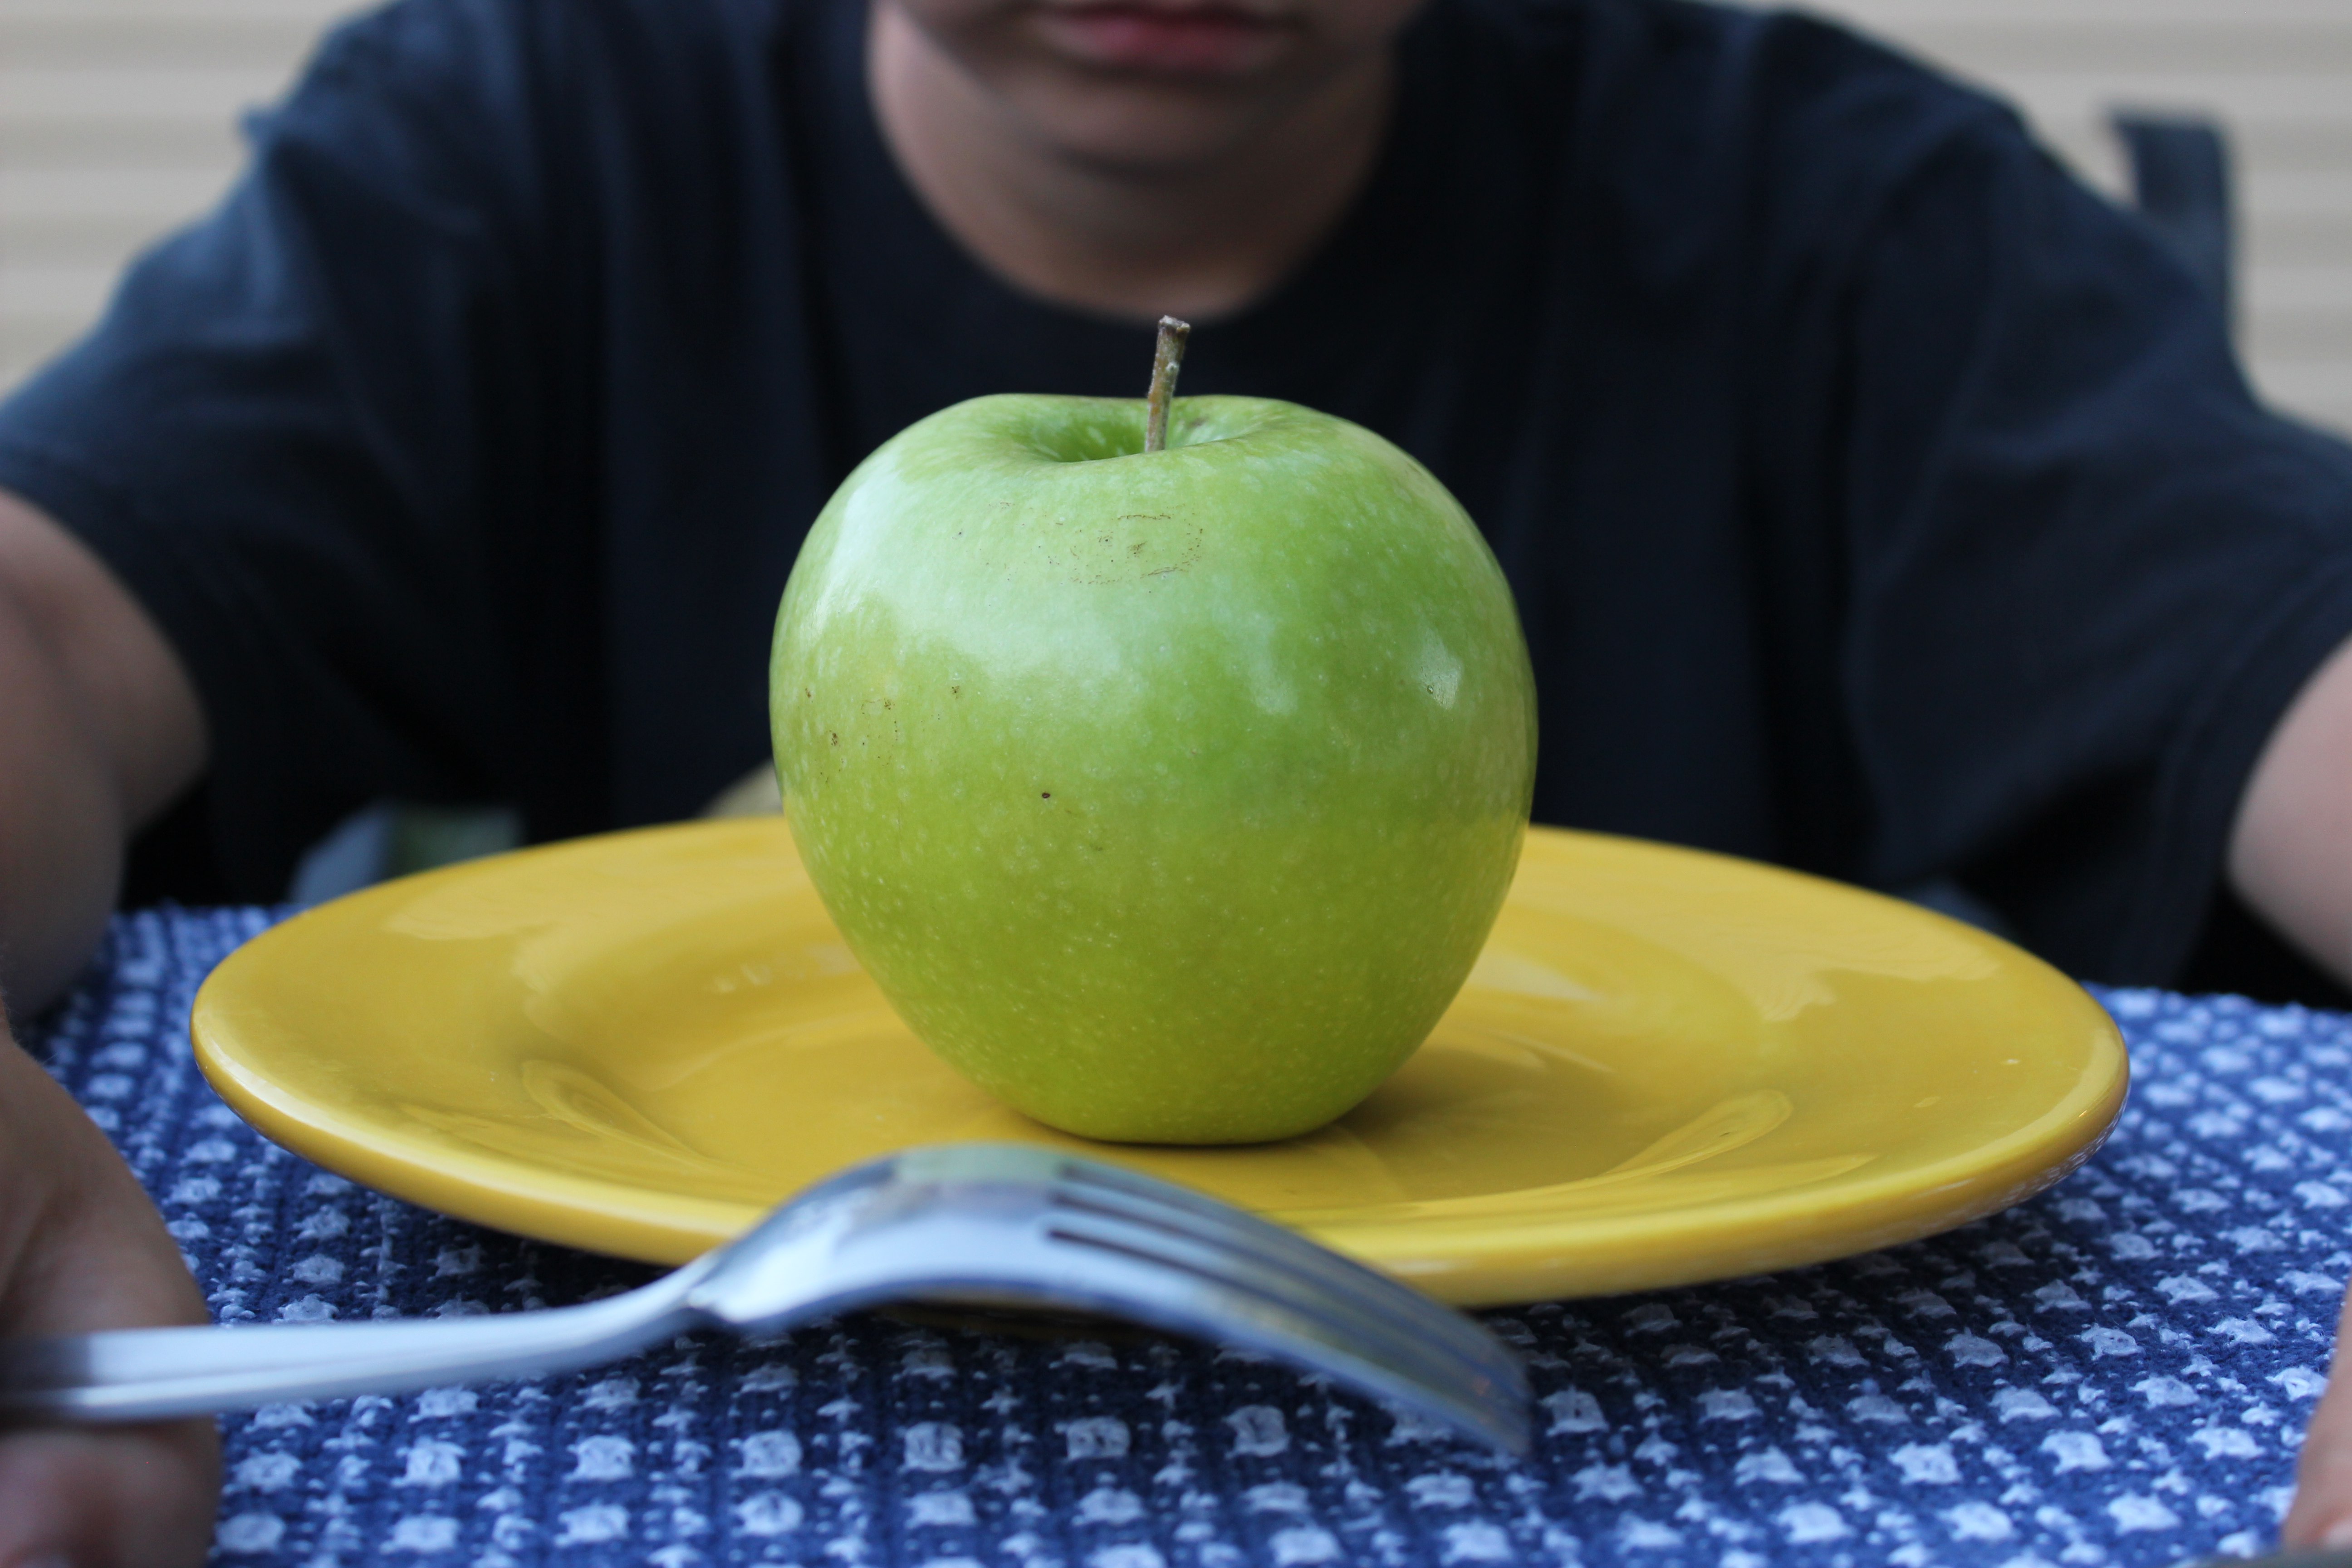 Living on the Teacher’s Apple: A Look at Educators’ Wages